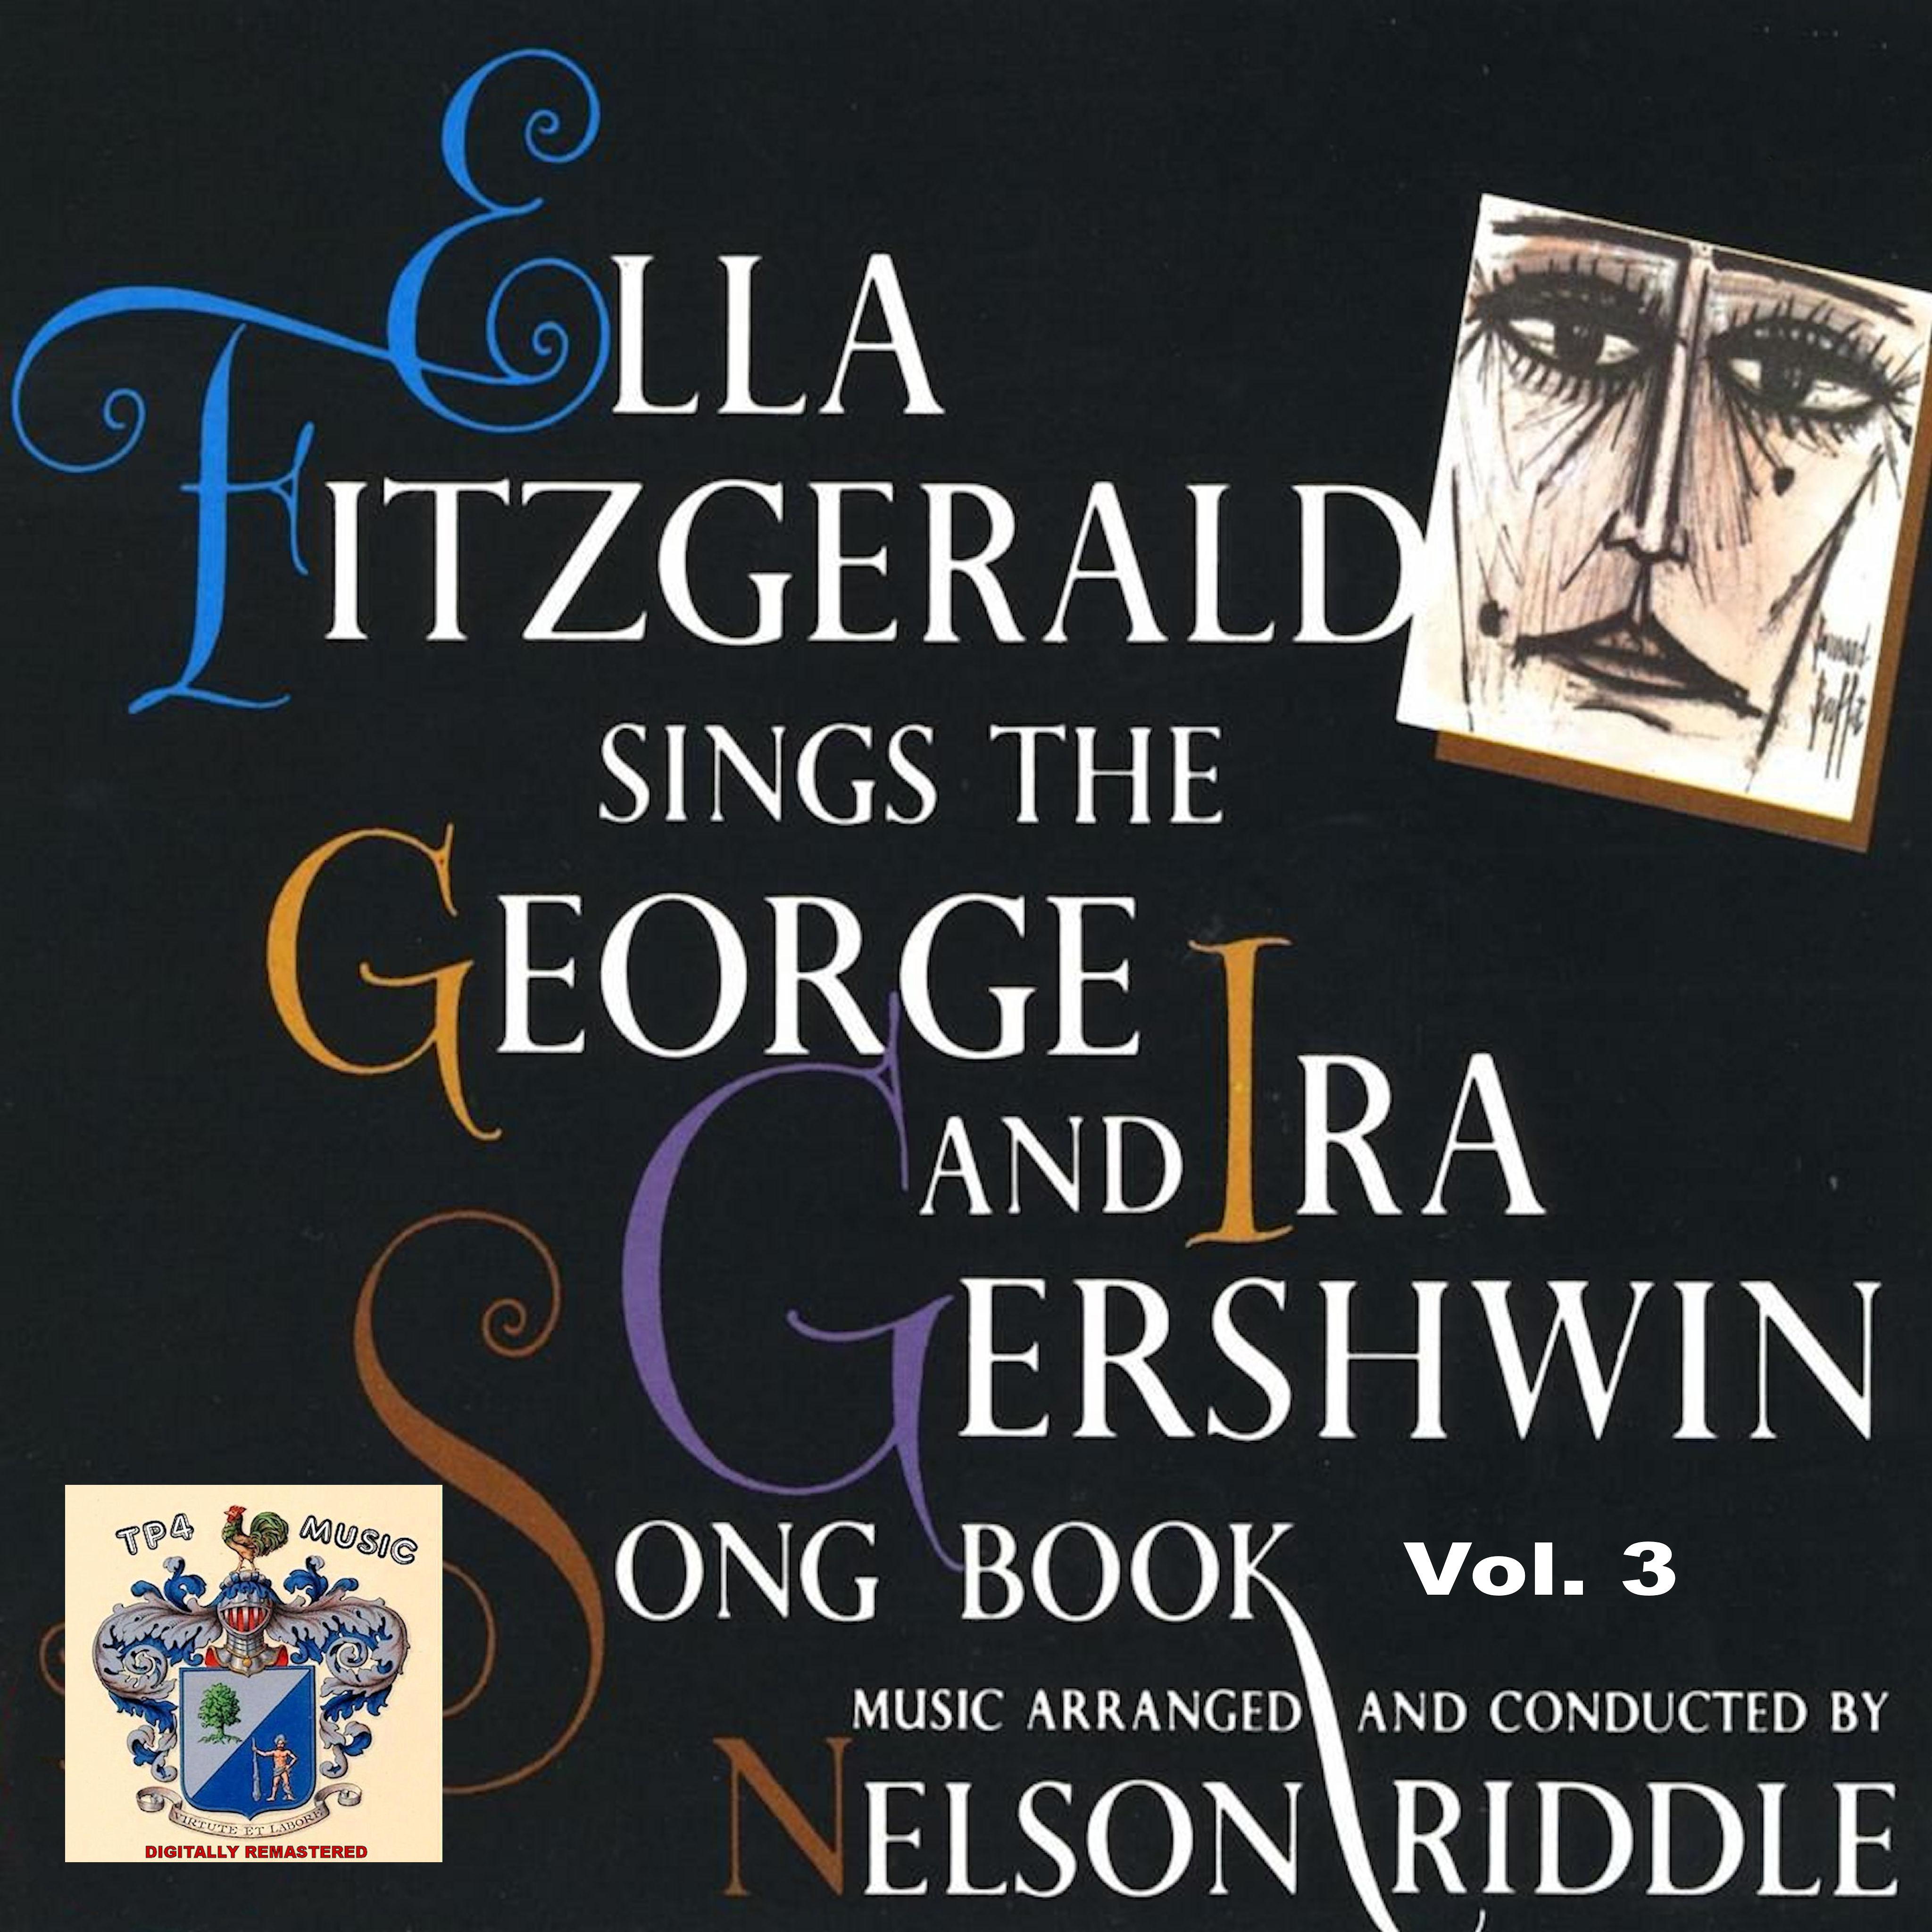 George and Ira Gershwin song Book Vol. 3